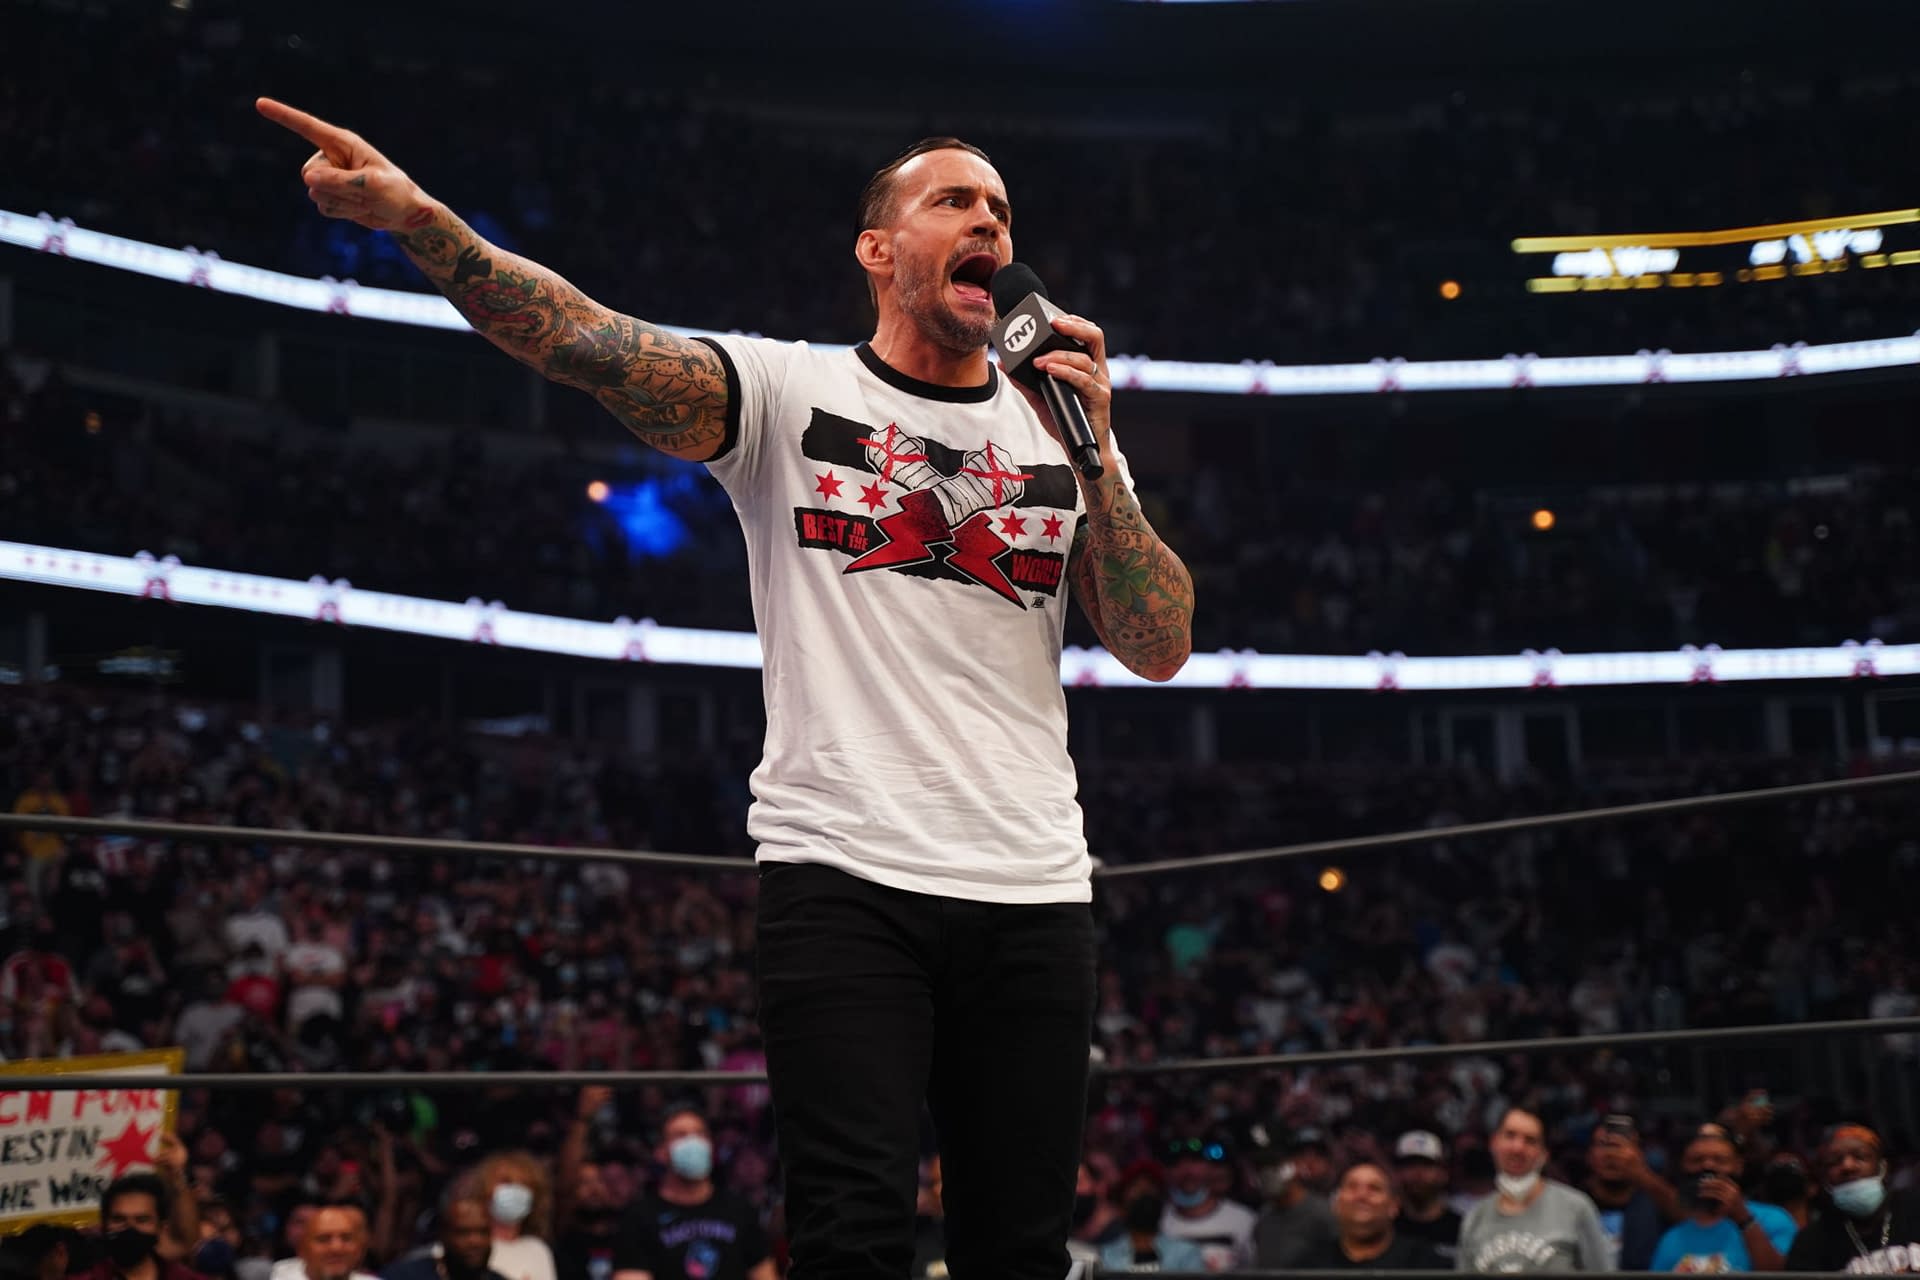 CM Punk's profile quietly reappears on WWE website